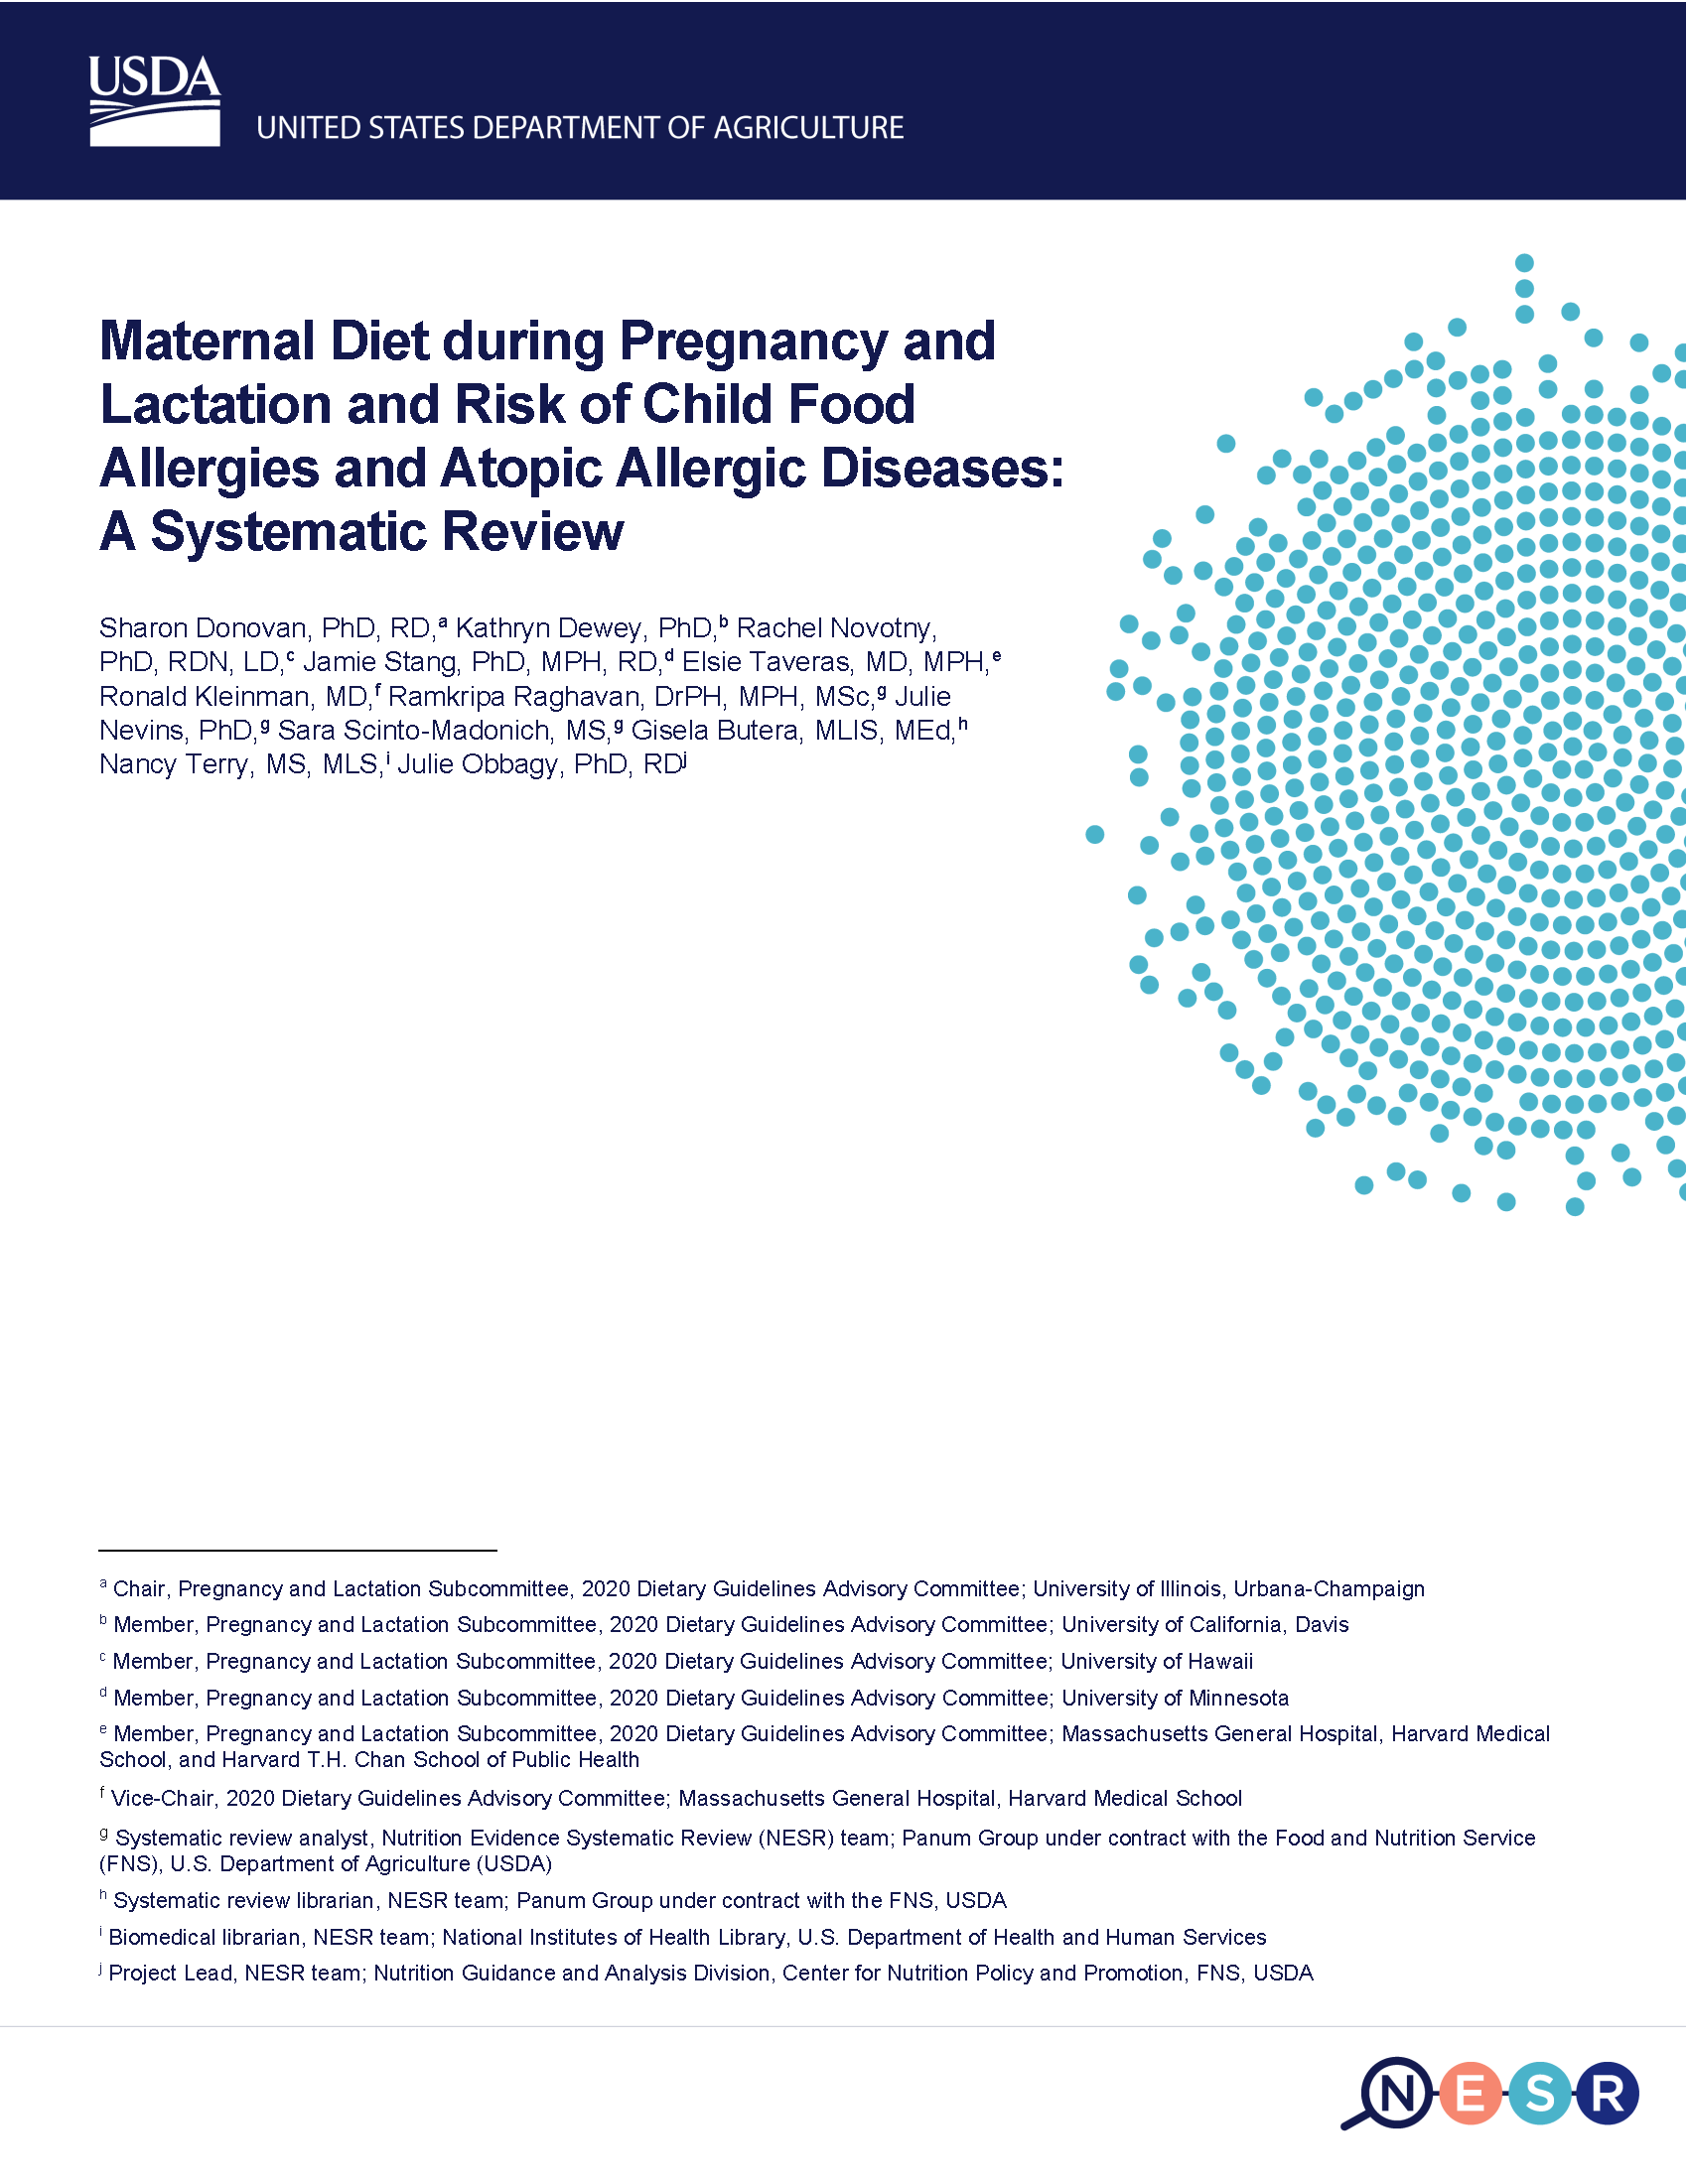 Cover of relationship between maternal diet during pregnancy and lactation and risk of childhood allergies report